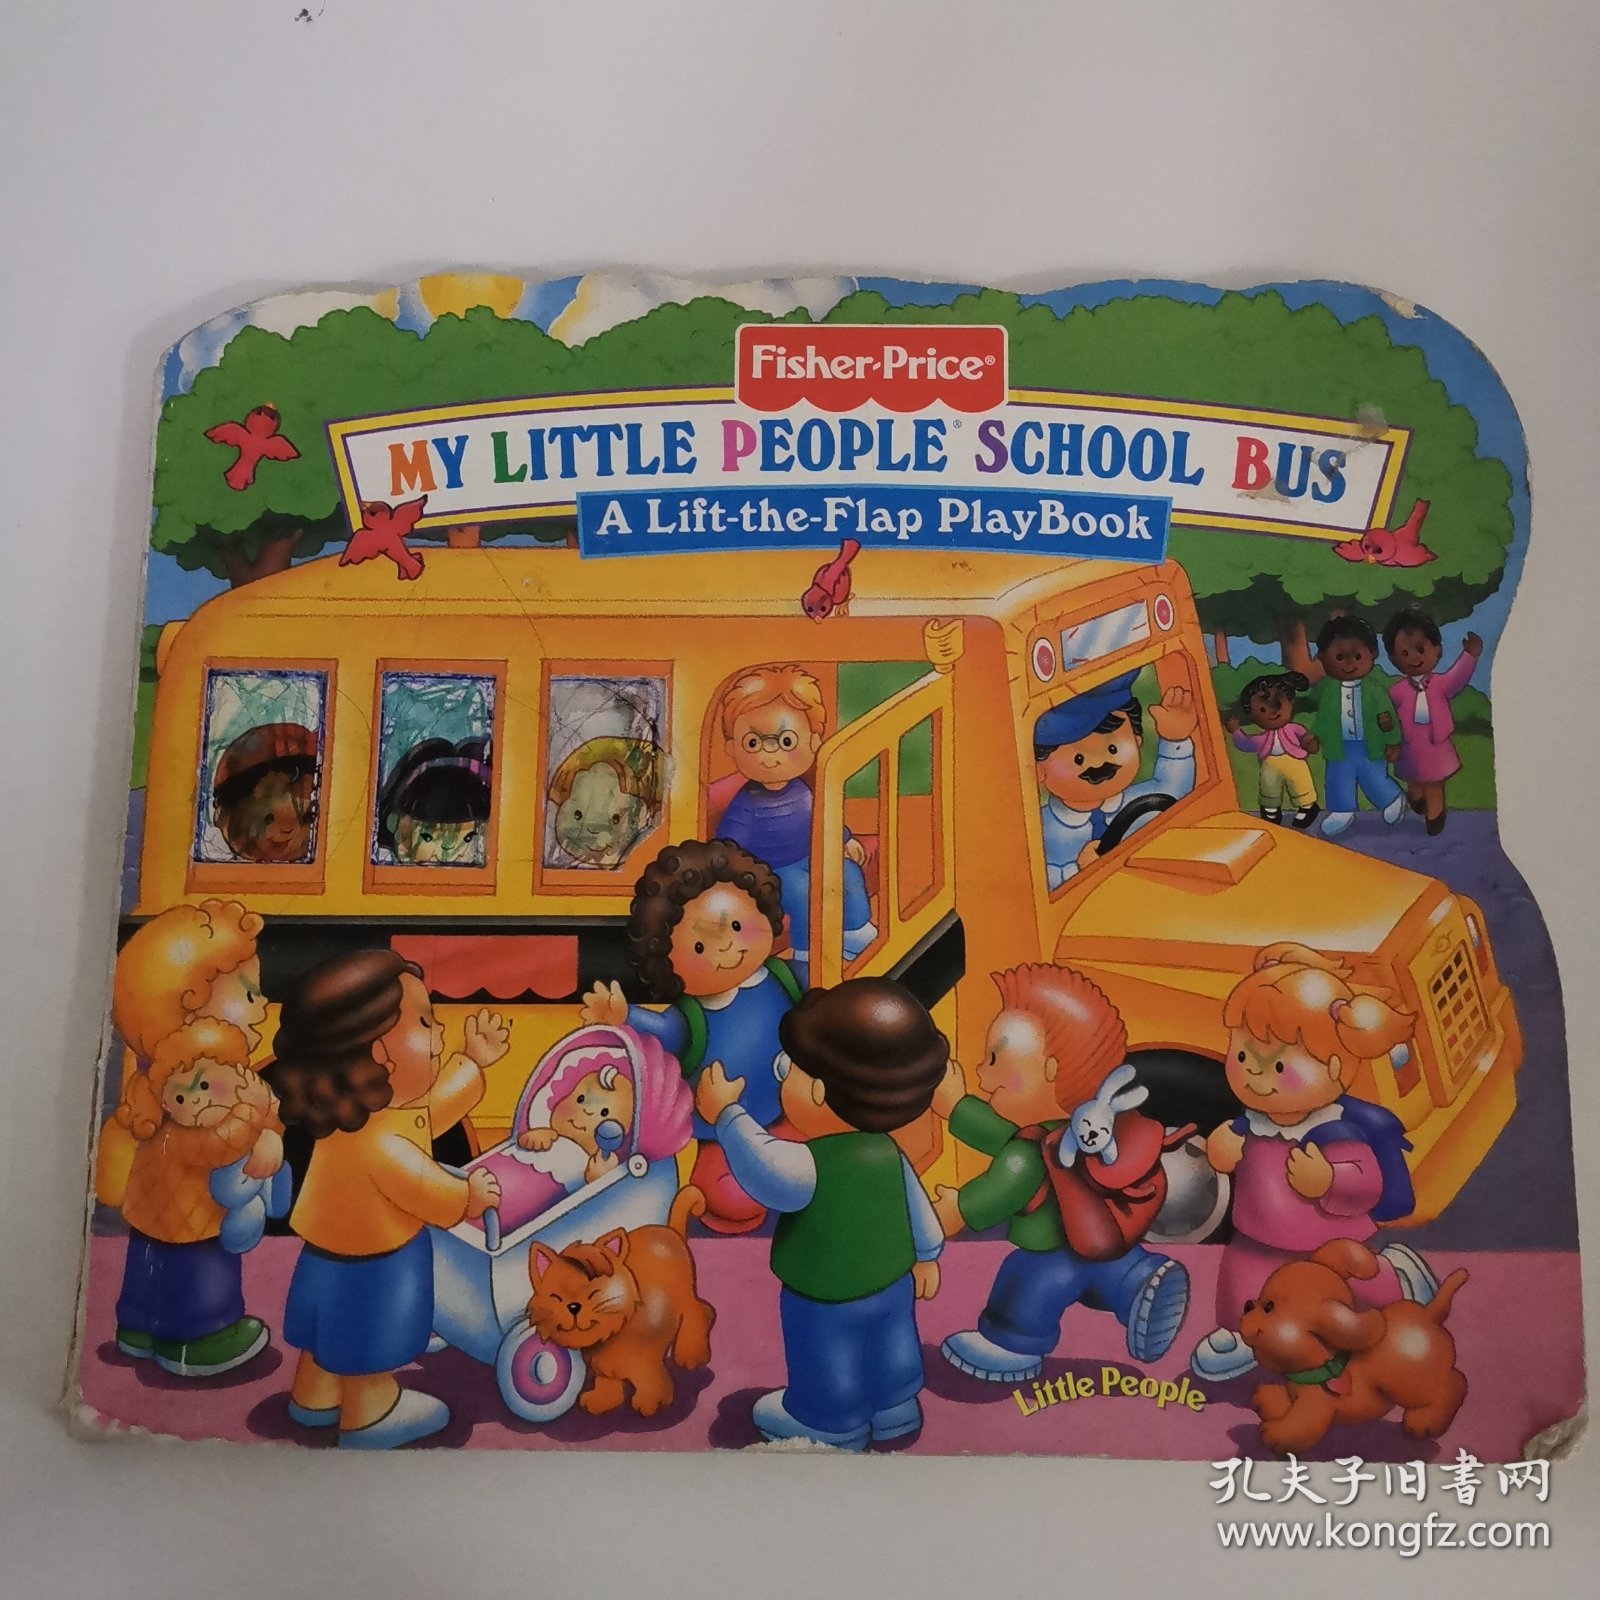 FISHER PRICE MY LITTLE PEOPLE SCHOOL BUS